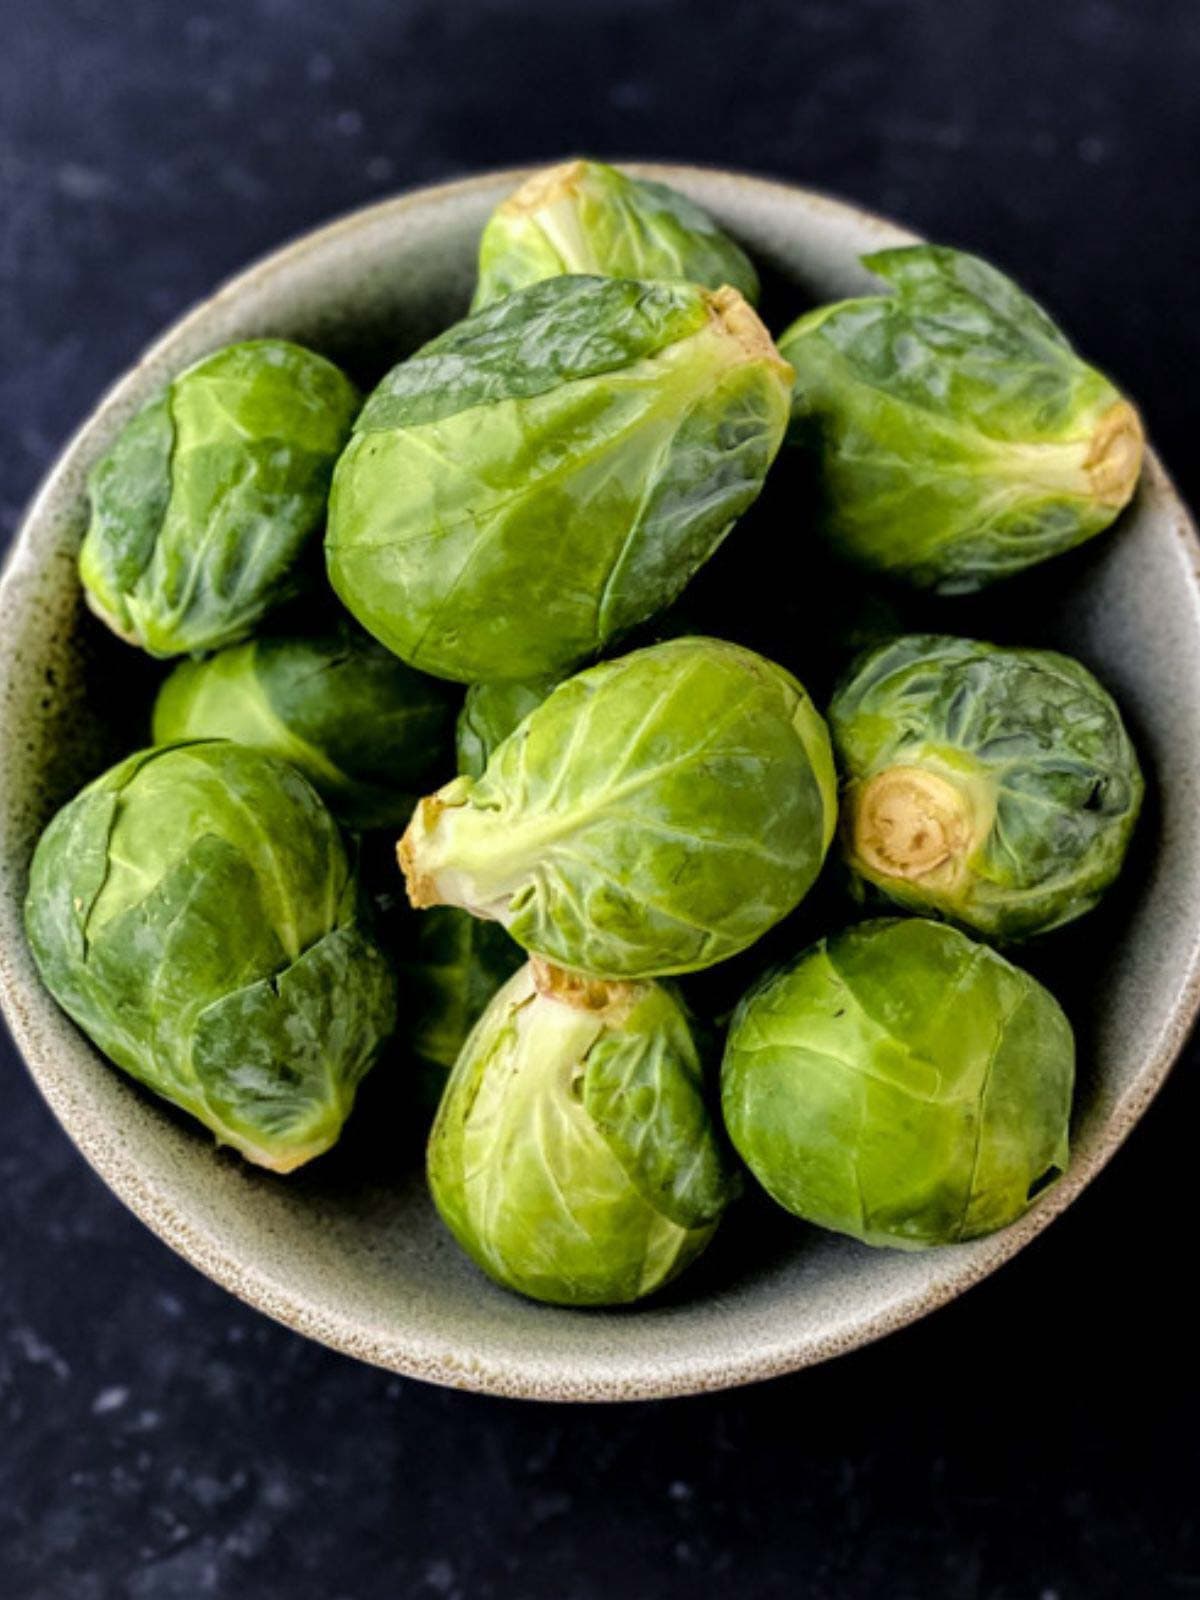 Bowls of Brussels sprouts